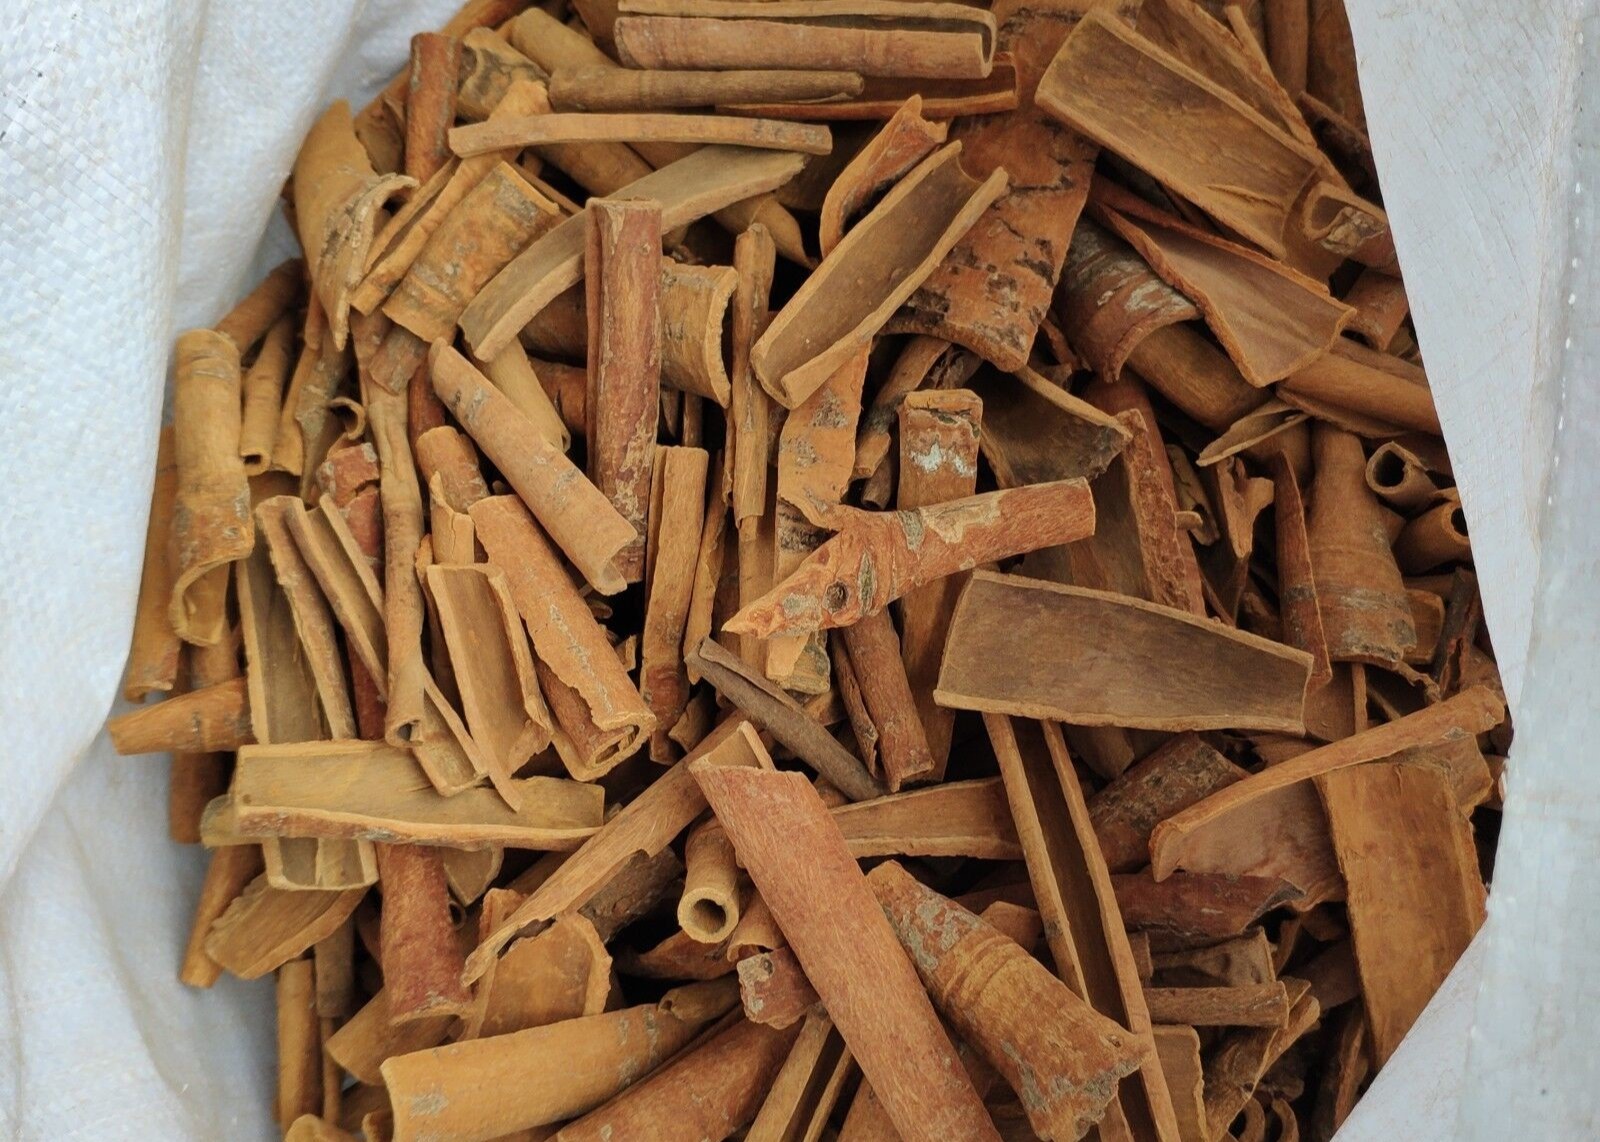 Buy Origin China Guangxi Cassia Cinnamon Sticks Mixed Quality Herbs And Spices at wholesale prices